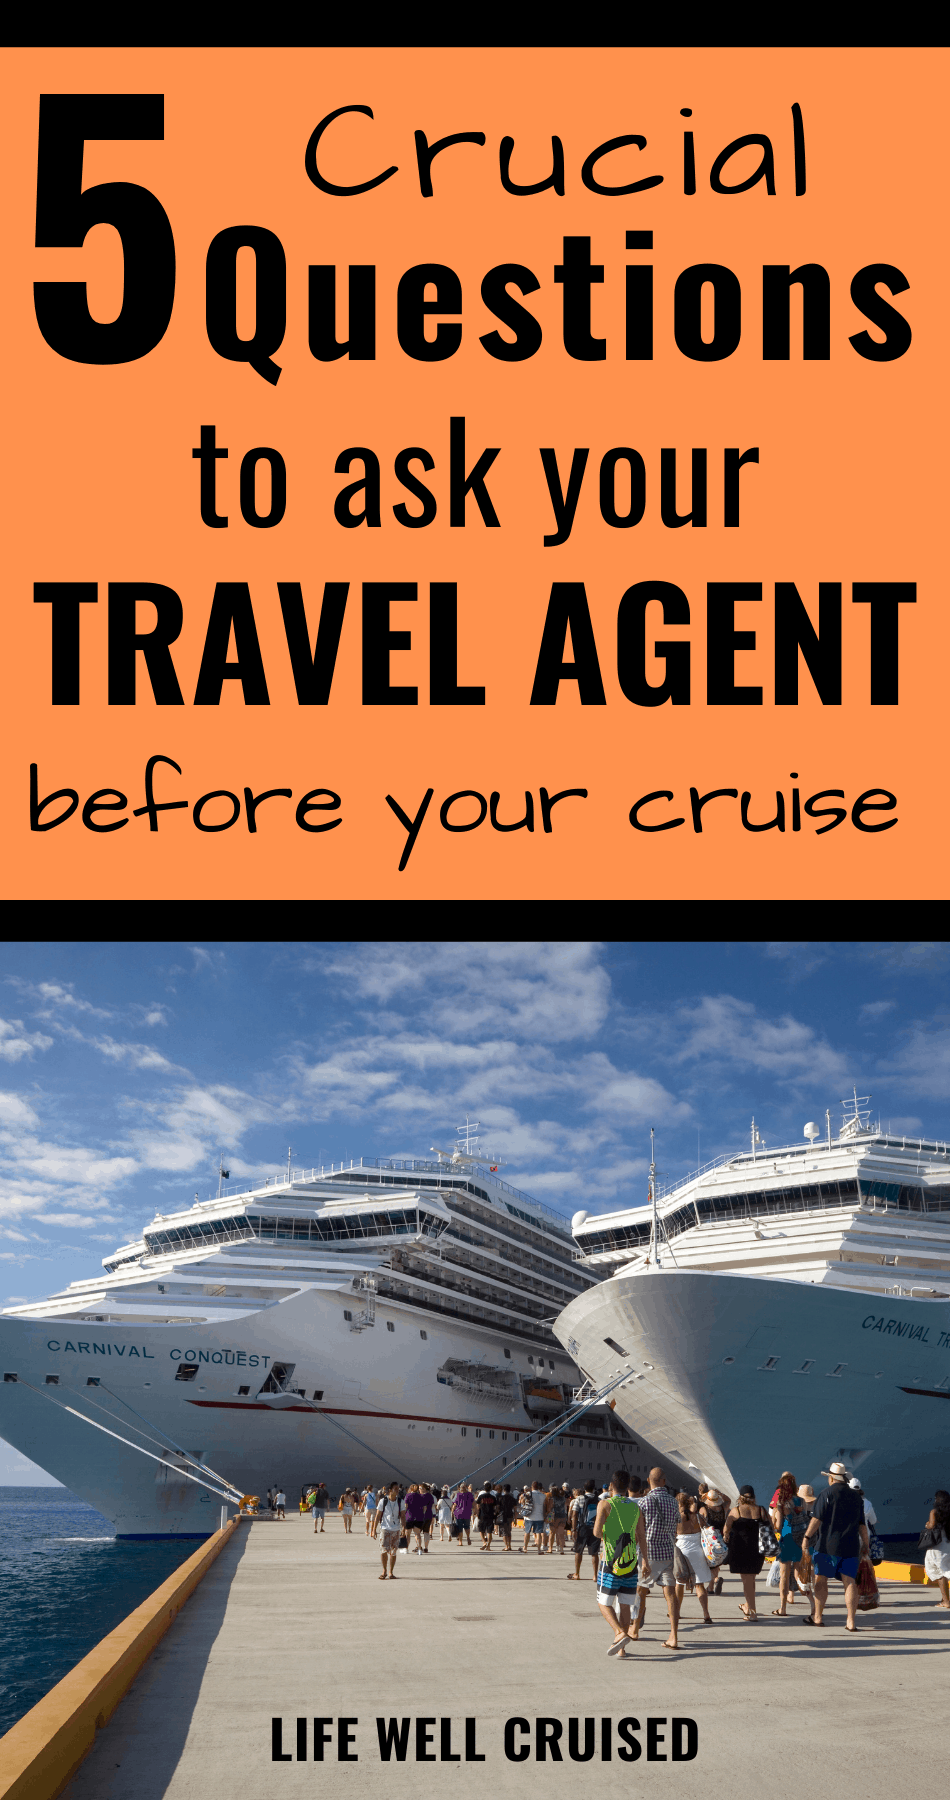 book cruise through travel agent or direct